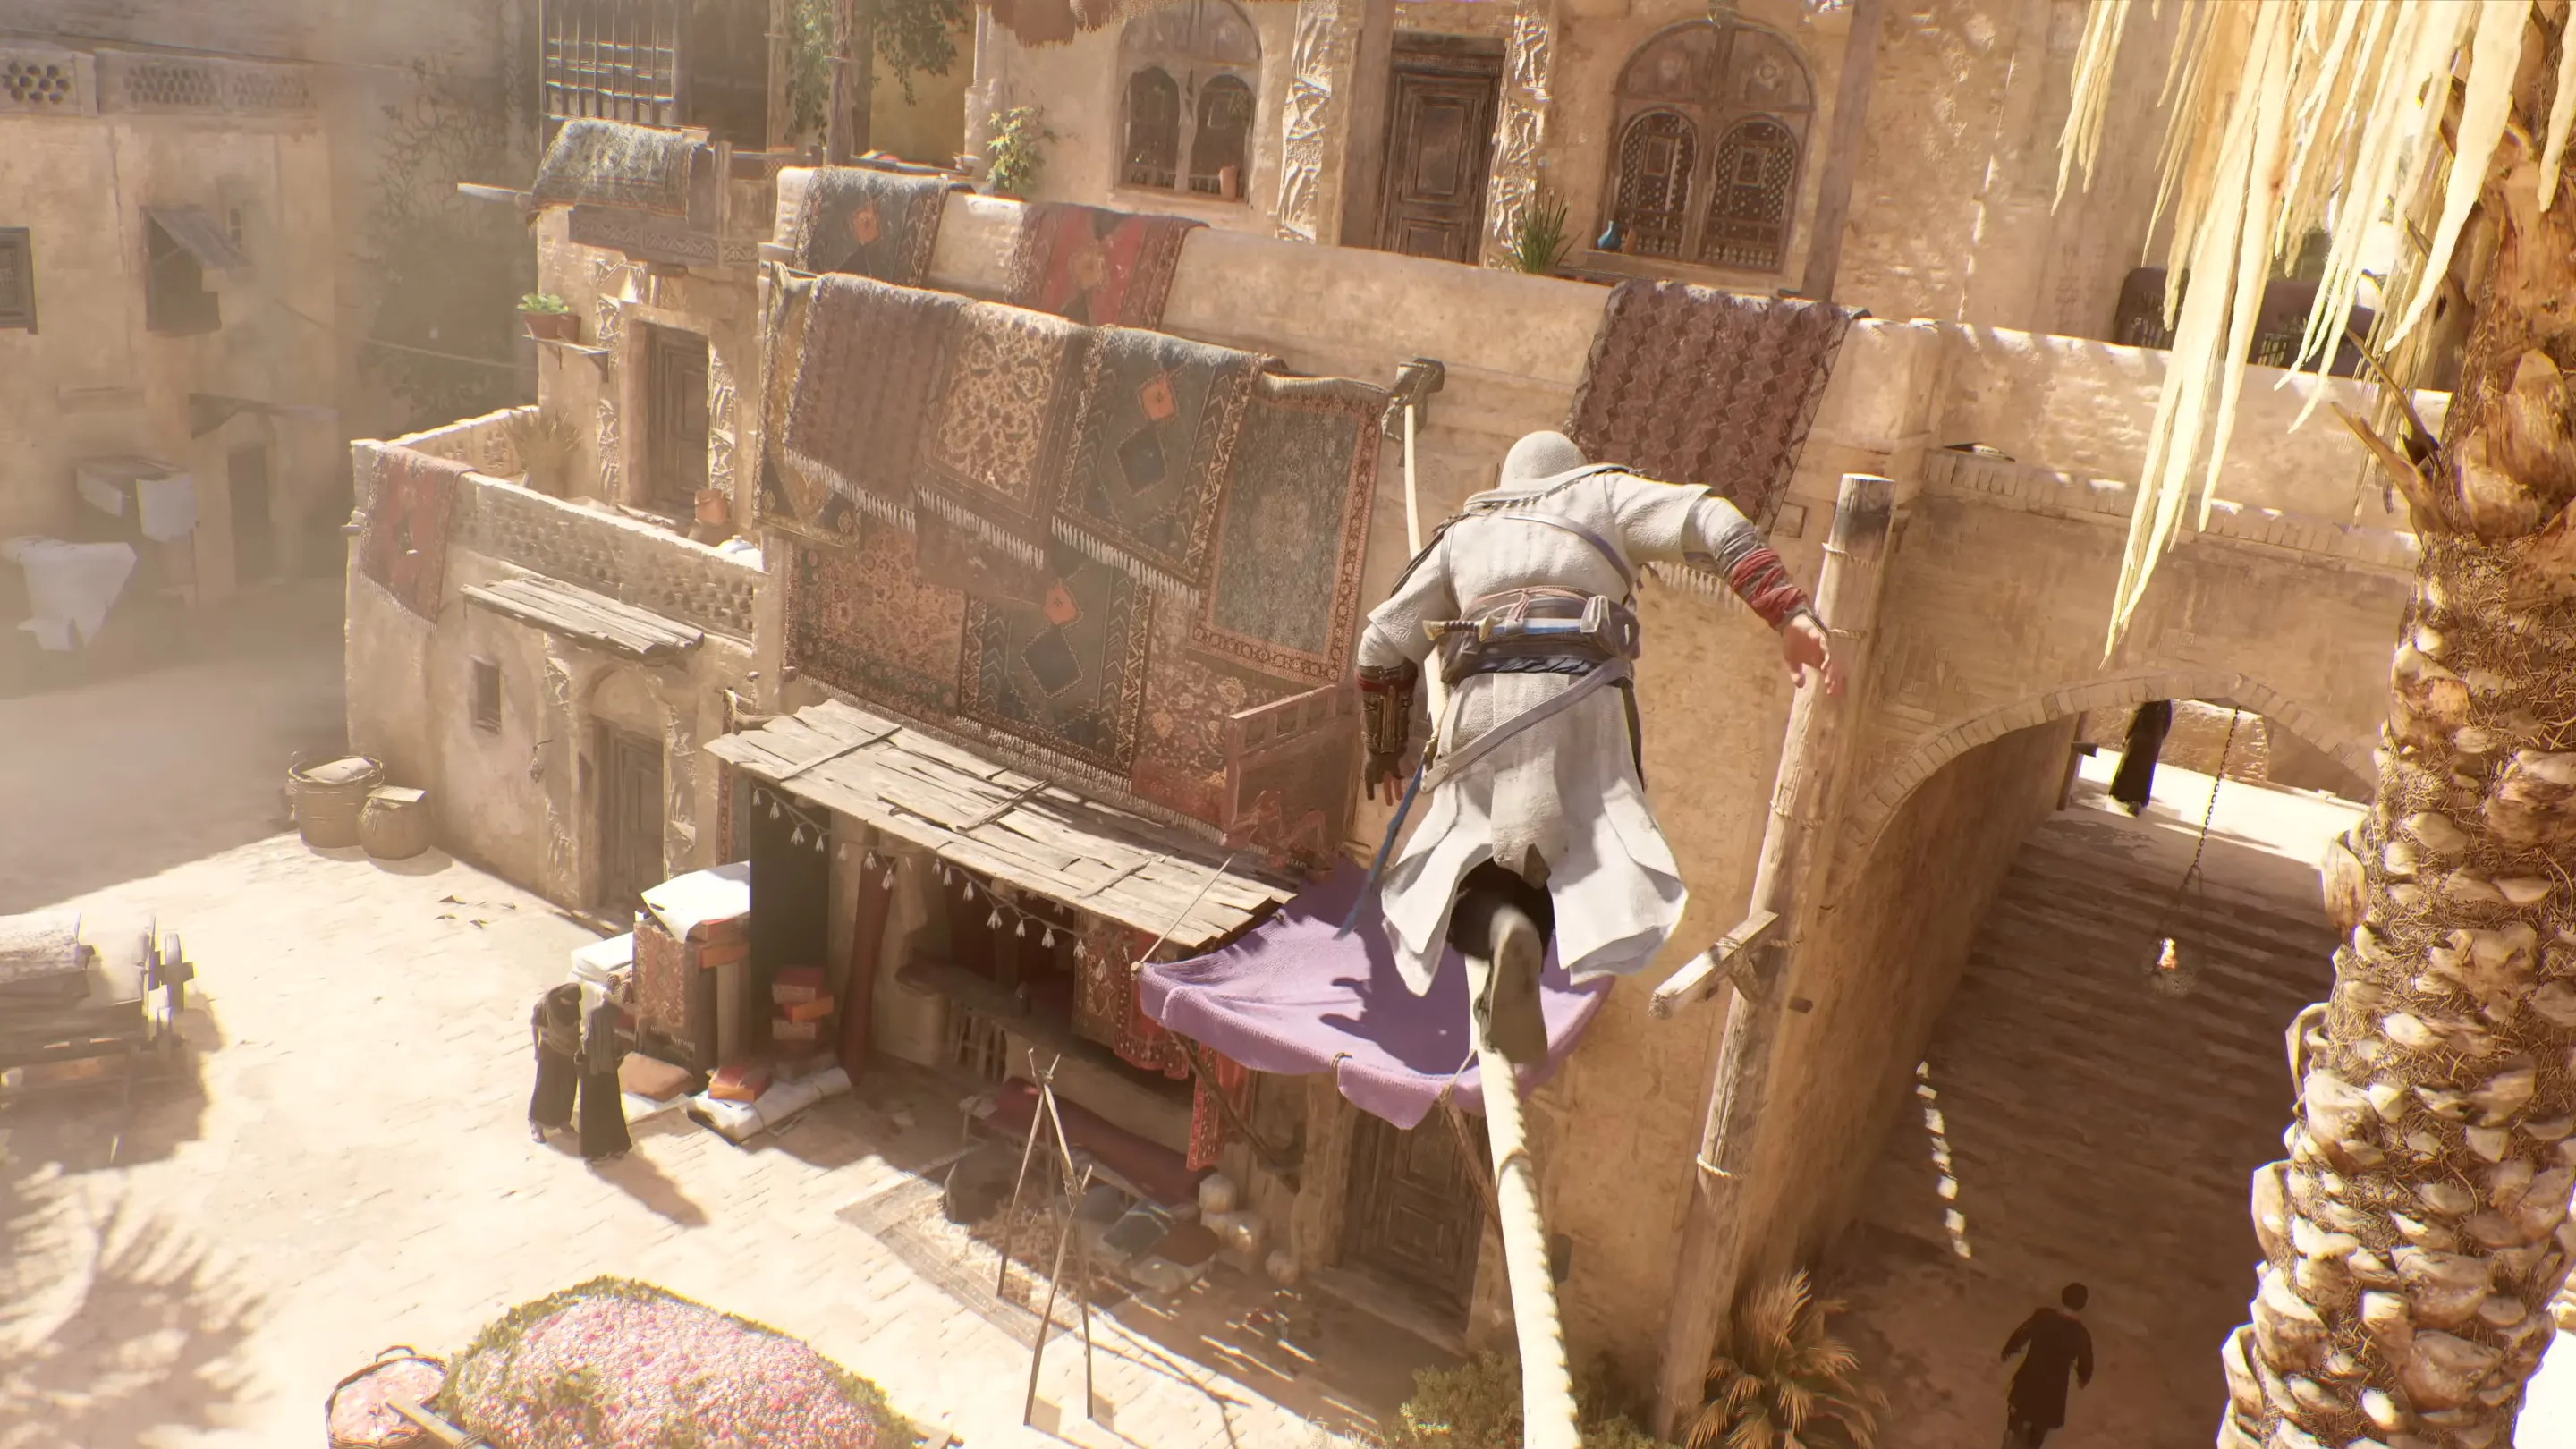 Assassin's Creed Mirage release date, news, and gameplay